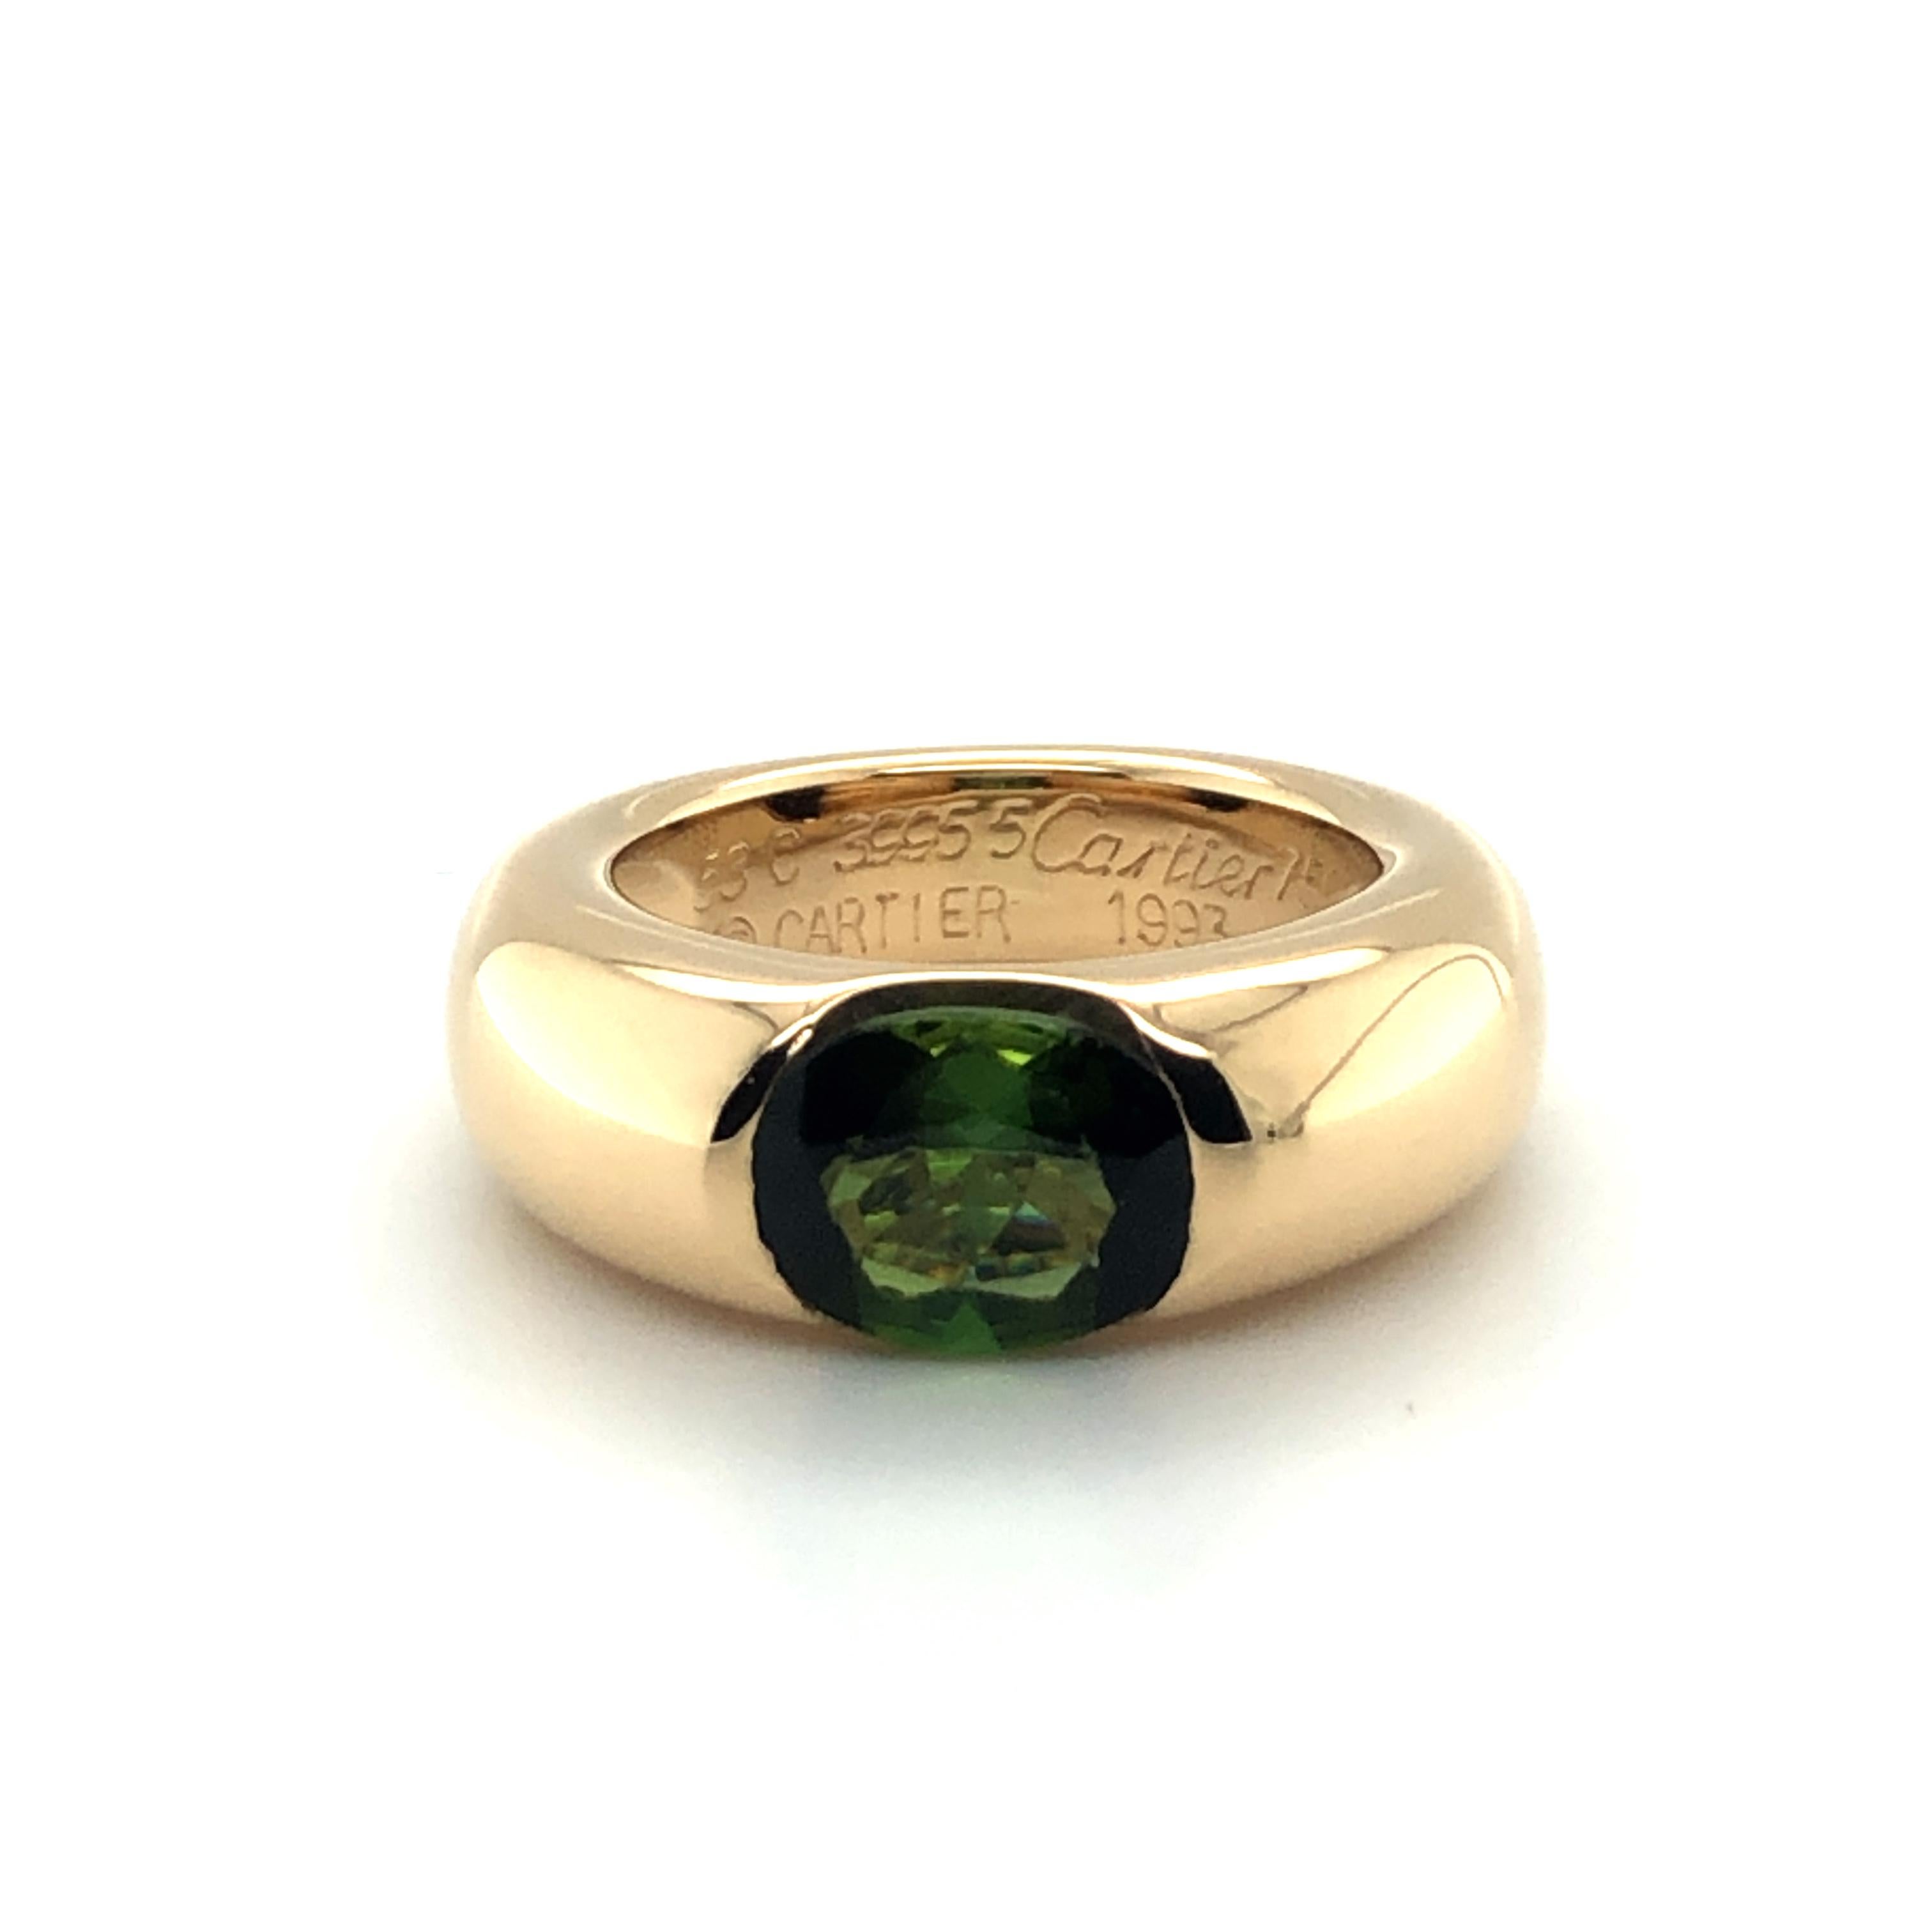 This timeless ring by famed jewellery house Cartier is set with an oval-shaped green tourmaline of approximately 2.30 carats.
A simple yet sophisticated look that never goes out of style.

Signed and numbered: Cartier 1993, 53 C 3995 5, LMD
Assay